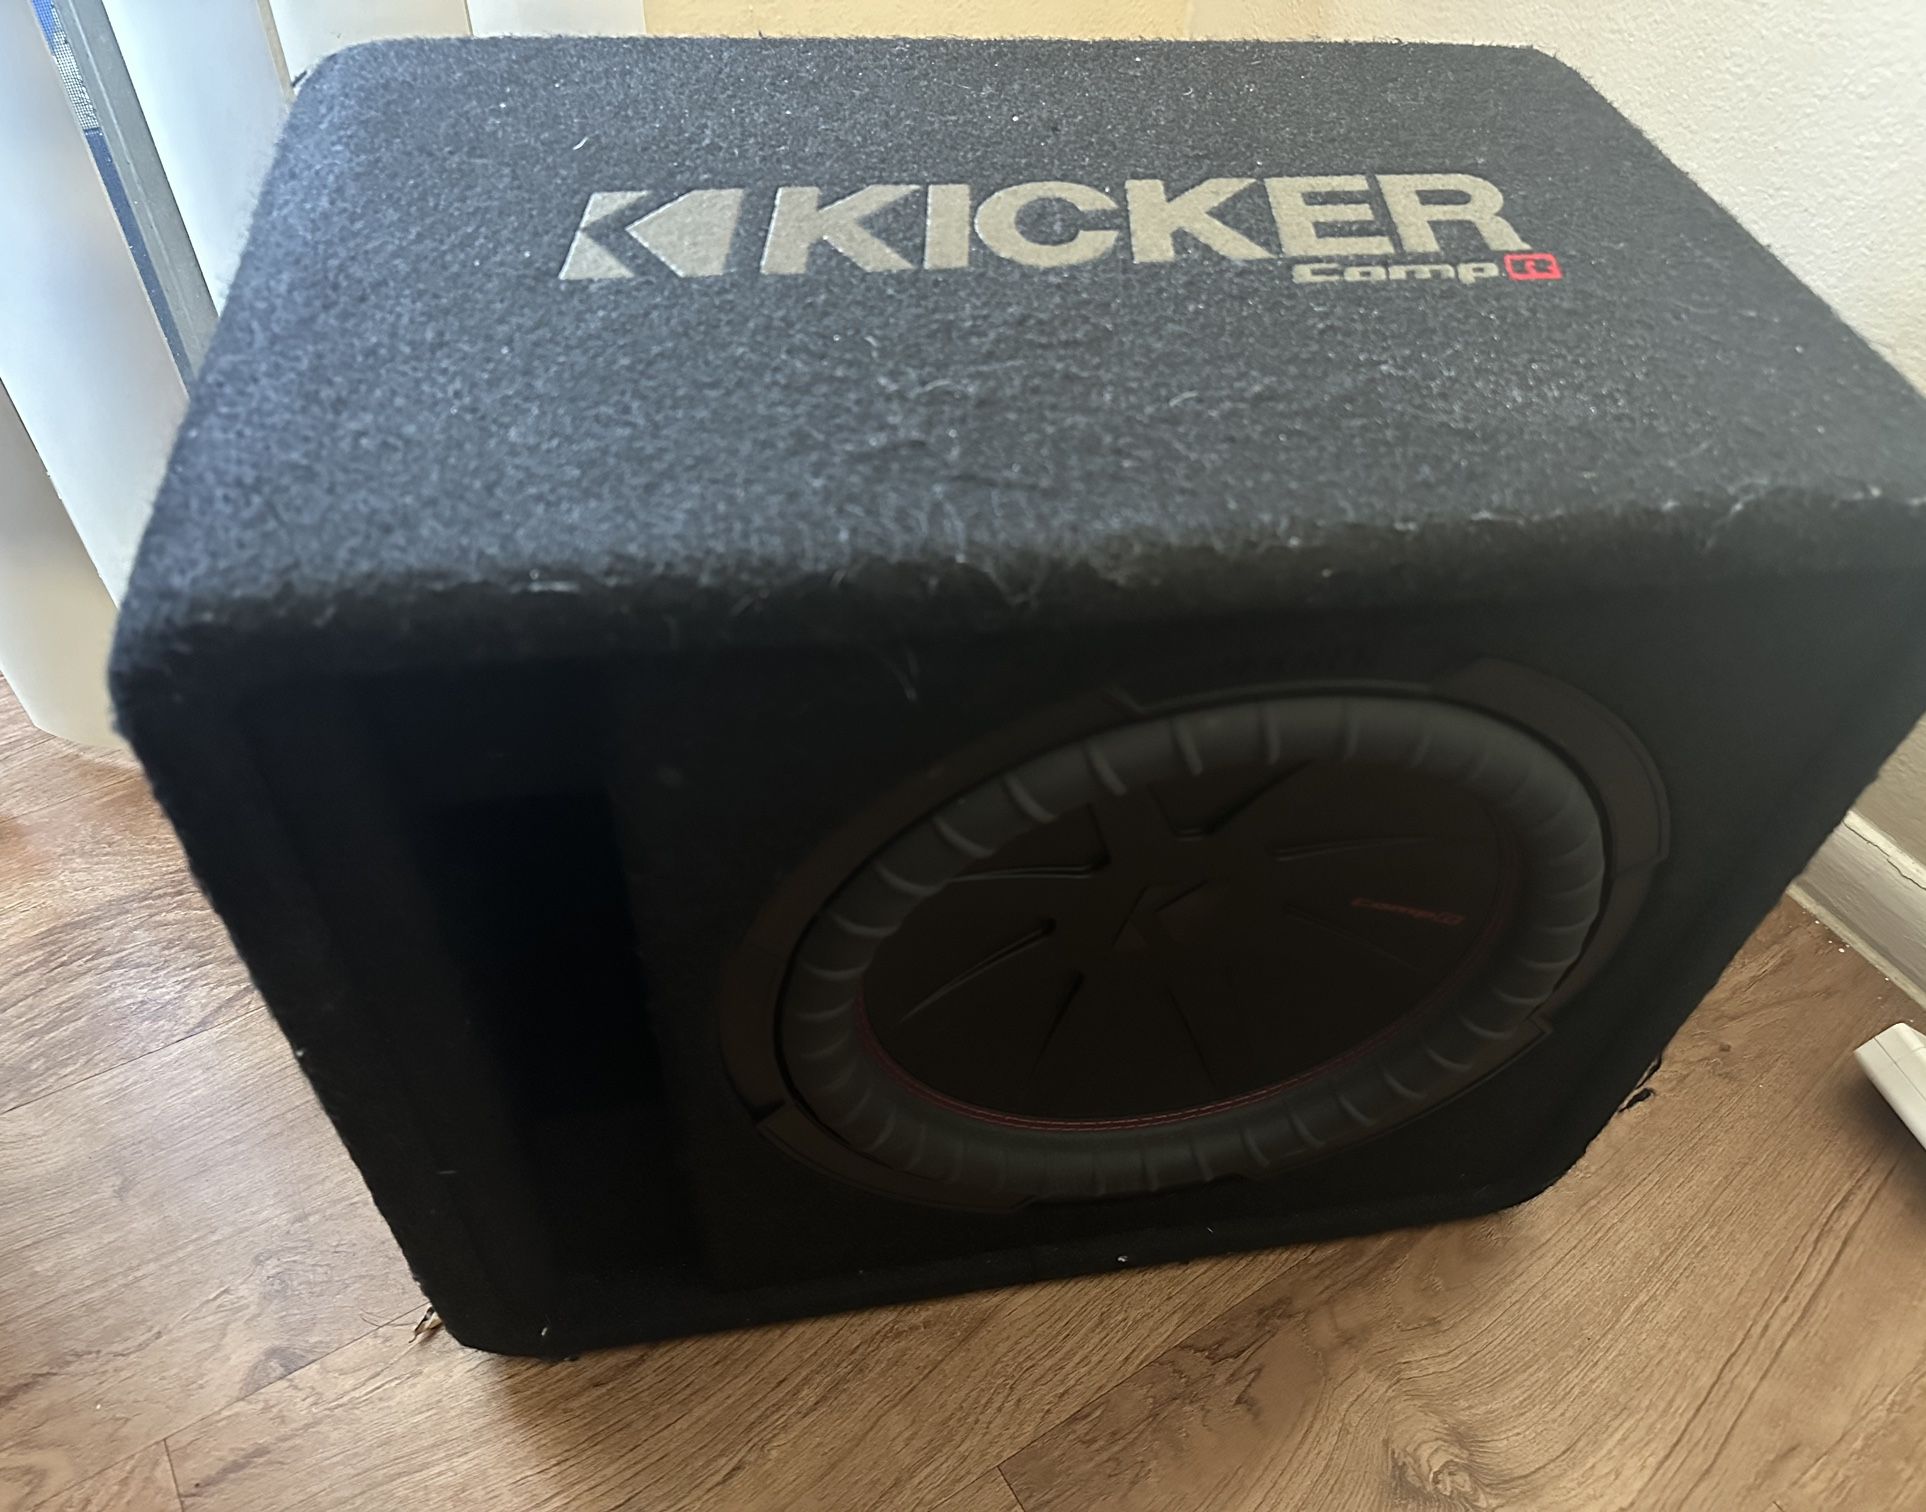 Kicker 48VCWR122 Serie CompR 500W RMS 2 Ohm Vented Loaded Subwoofer